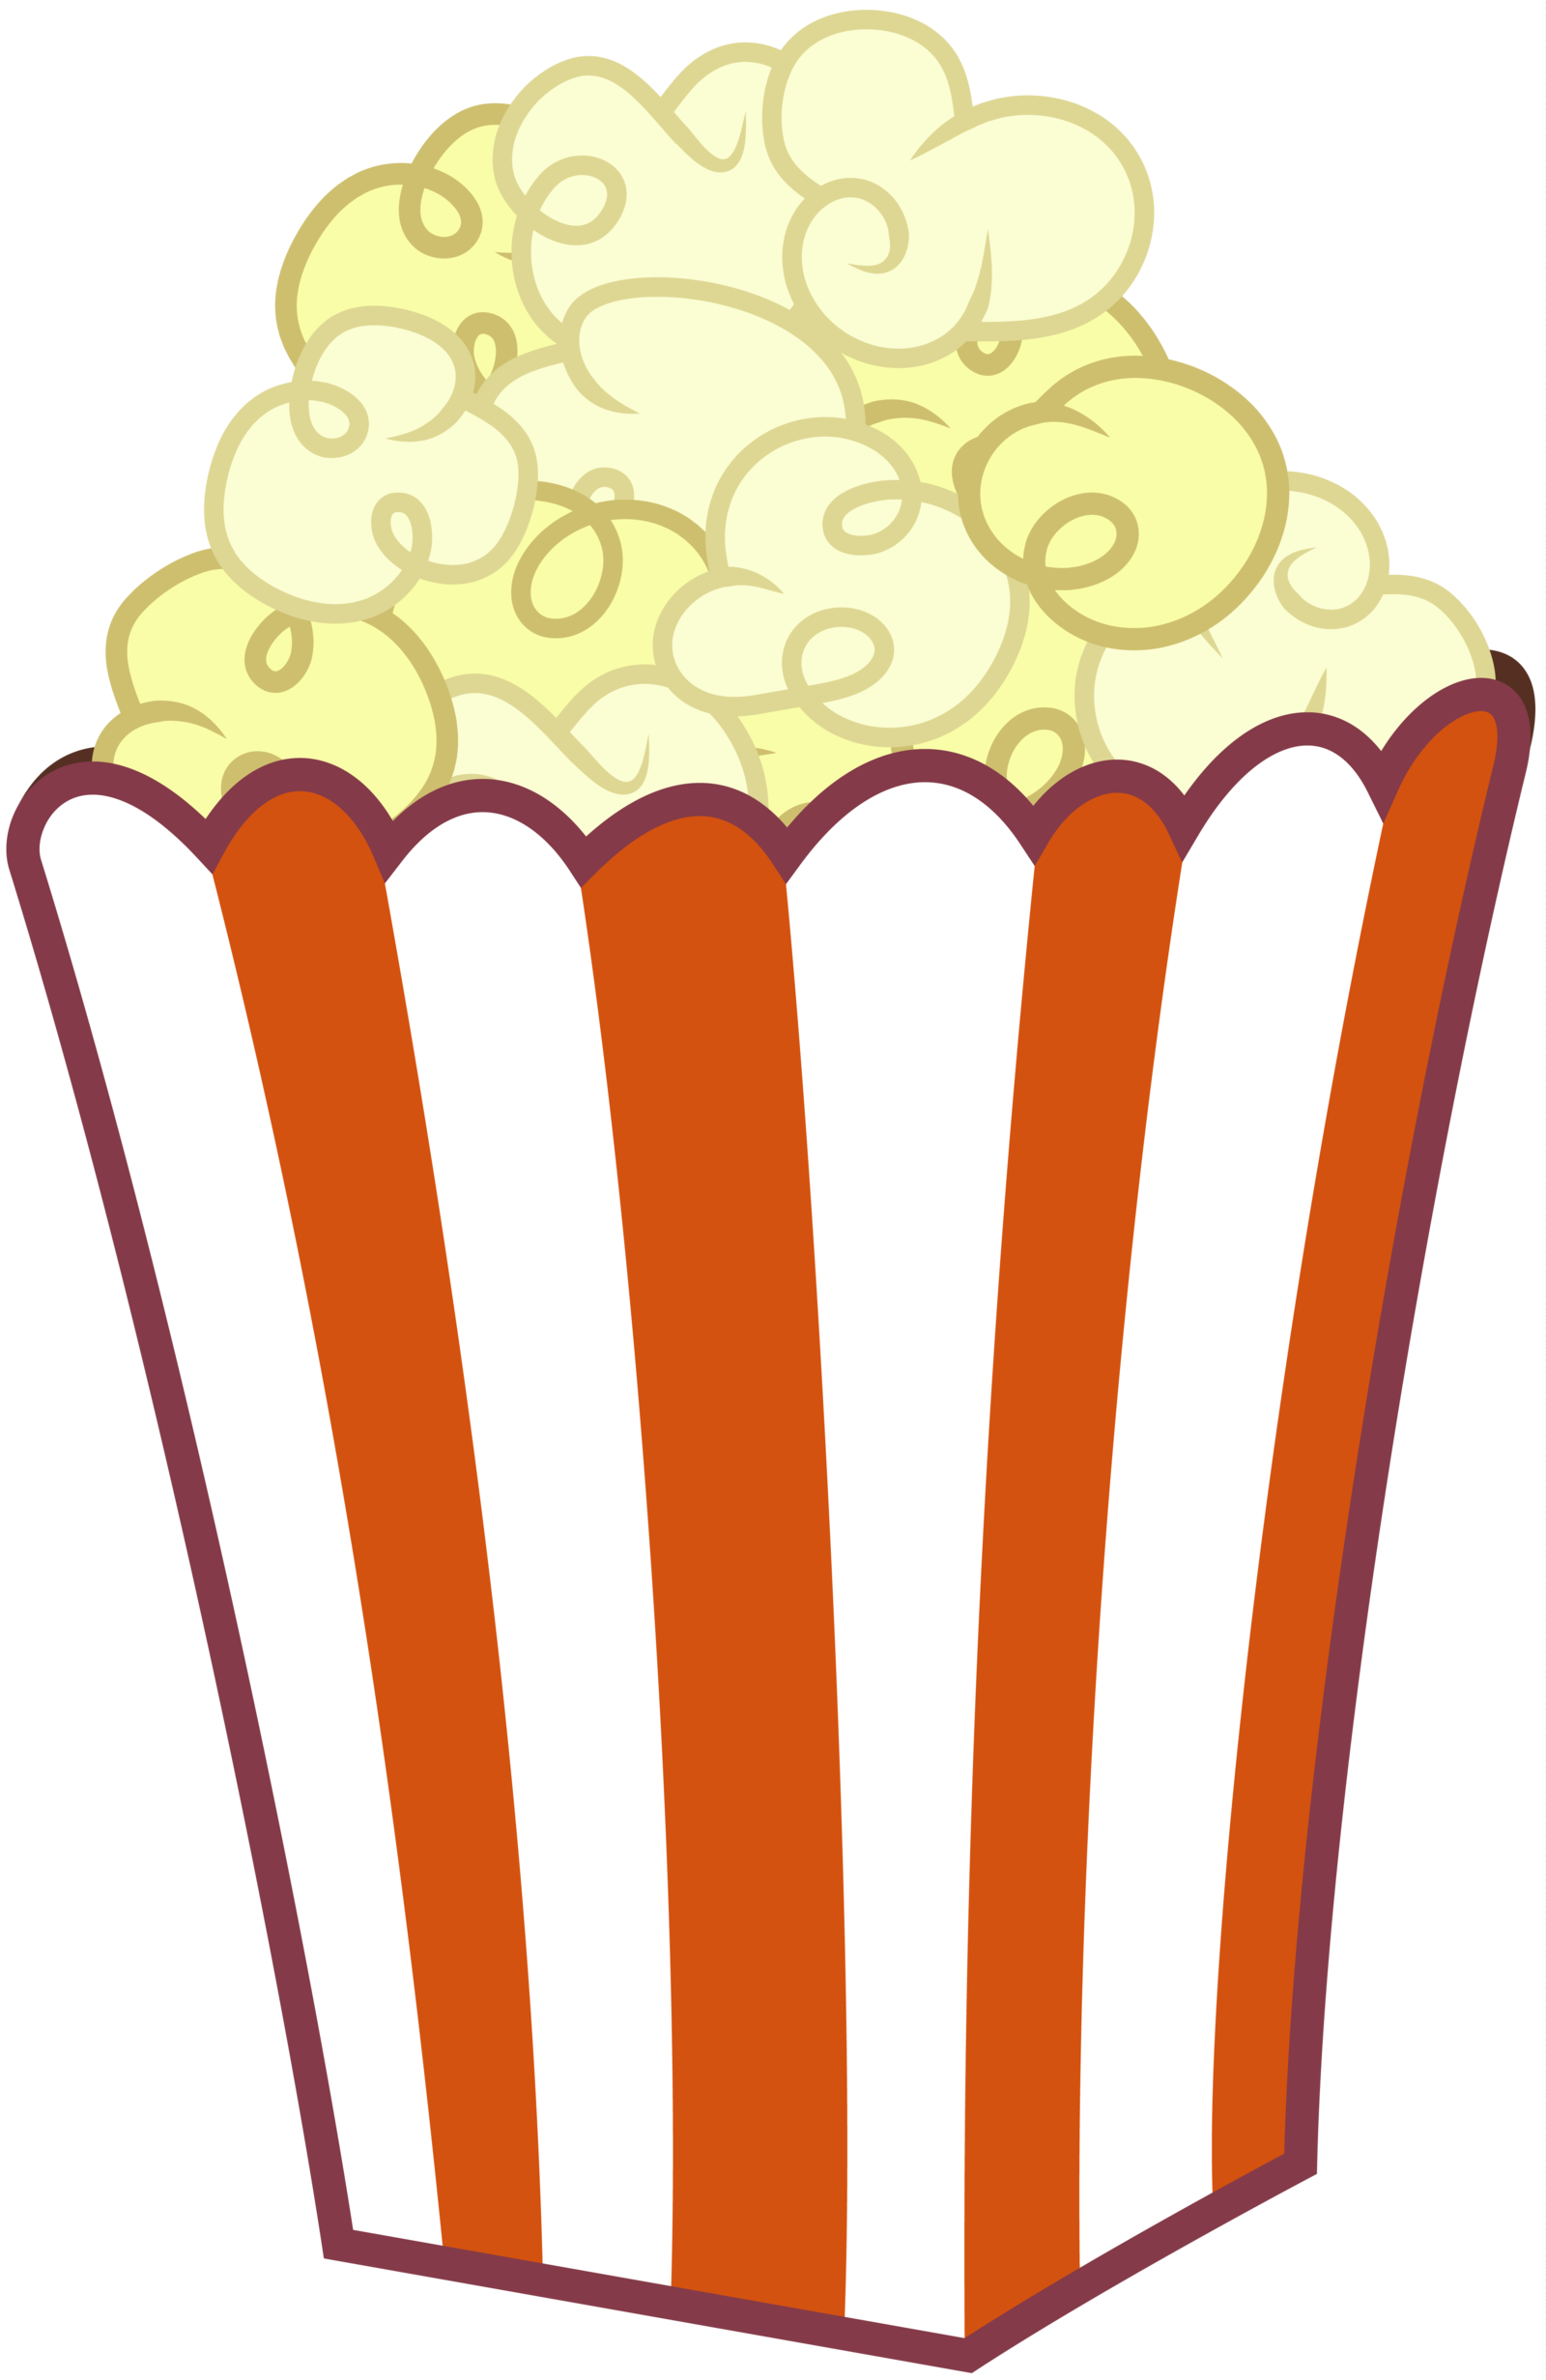 popcorn bucket clipart black and white 20 free Cliparts | Download